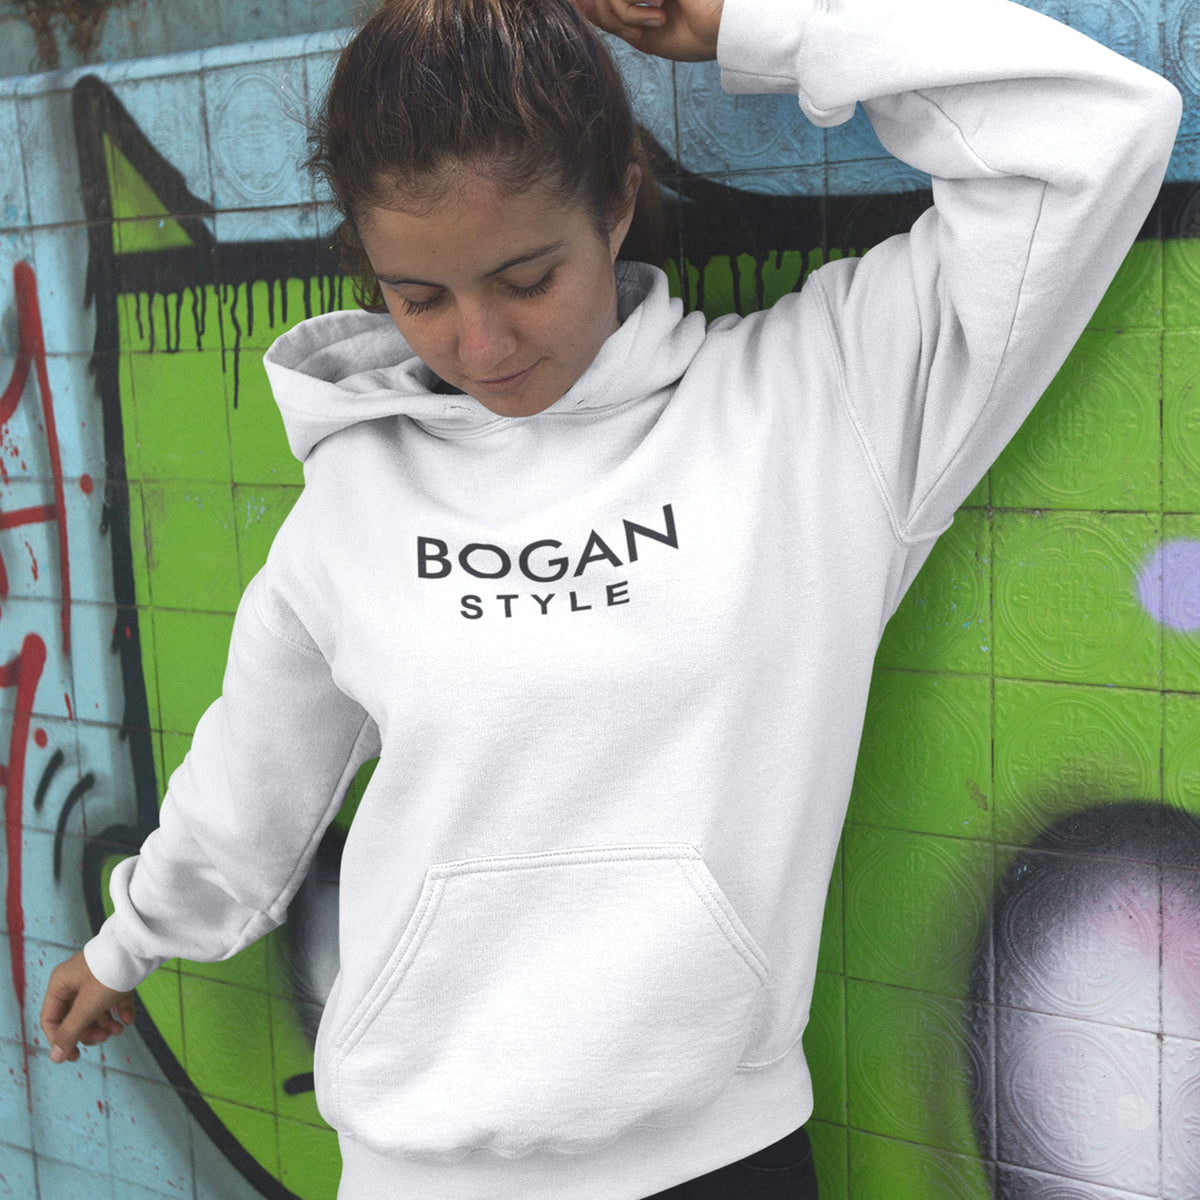 Woman wearing white hoodie standing in front of graffiti wall